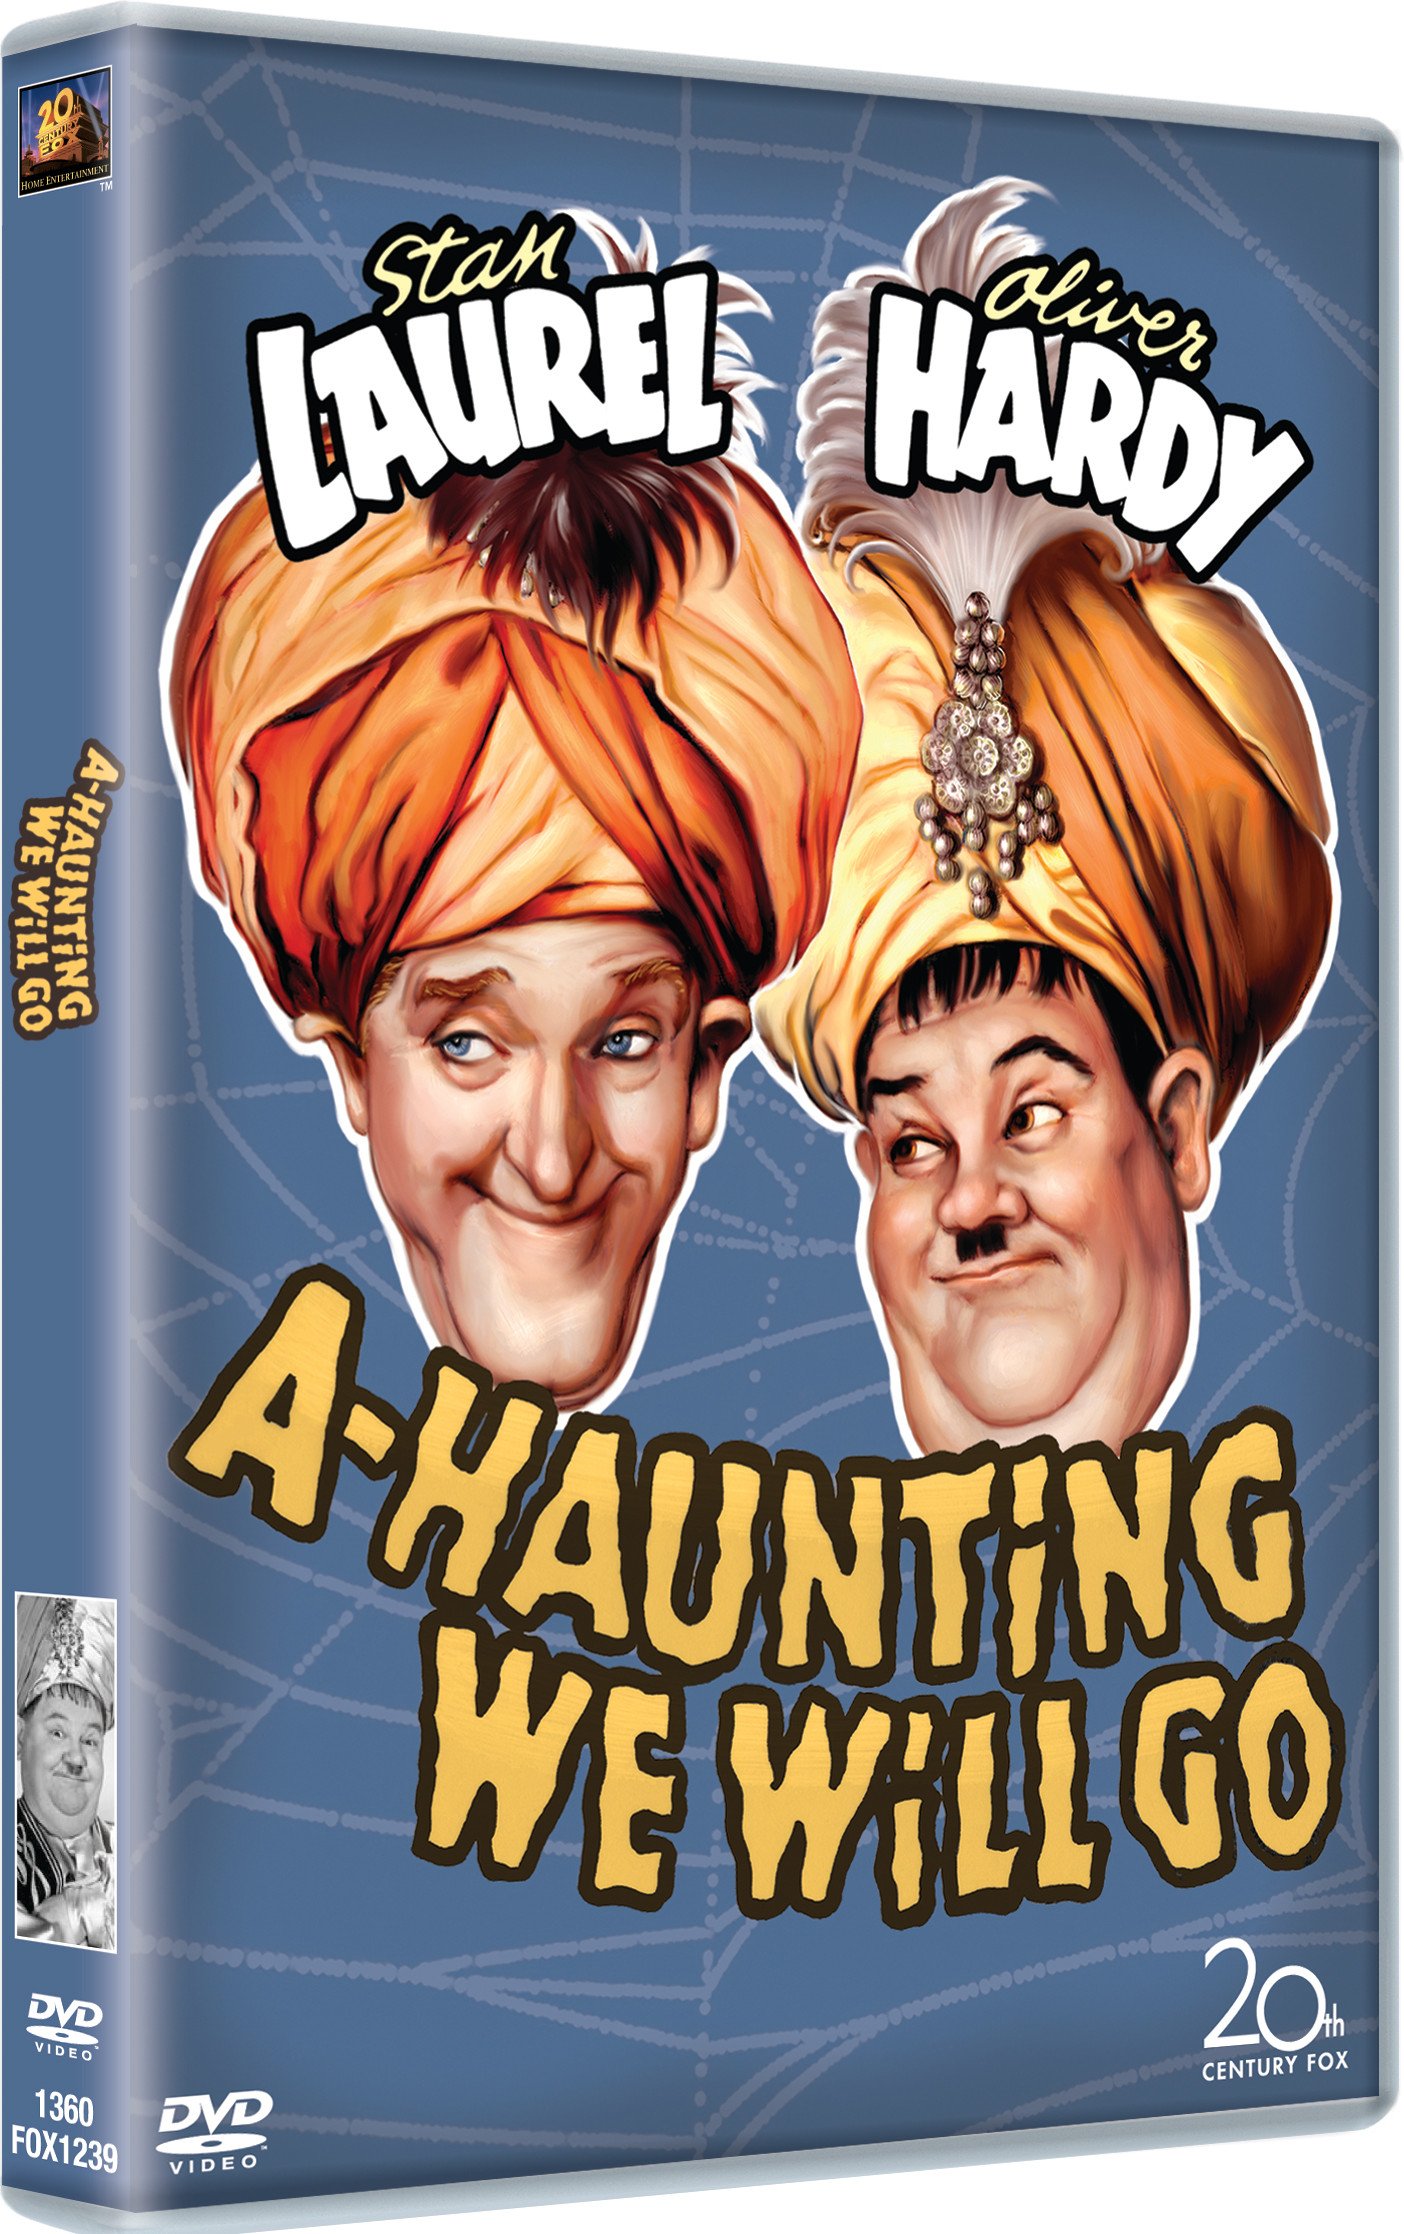 laurel-hardy-a-haunting-we-will-go-movie-purchase-or-watch-online